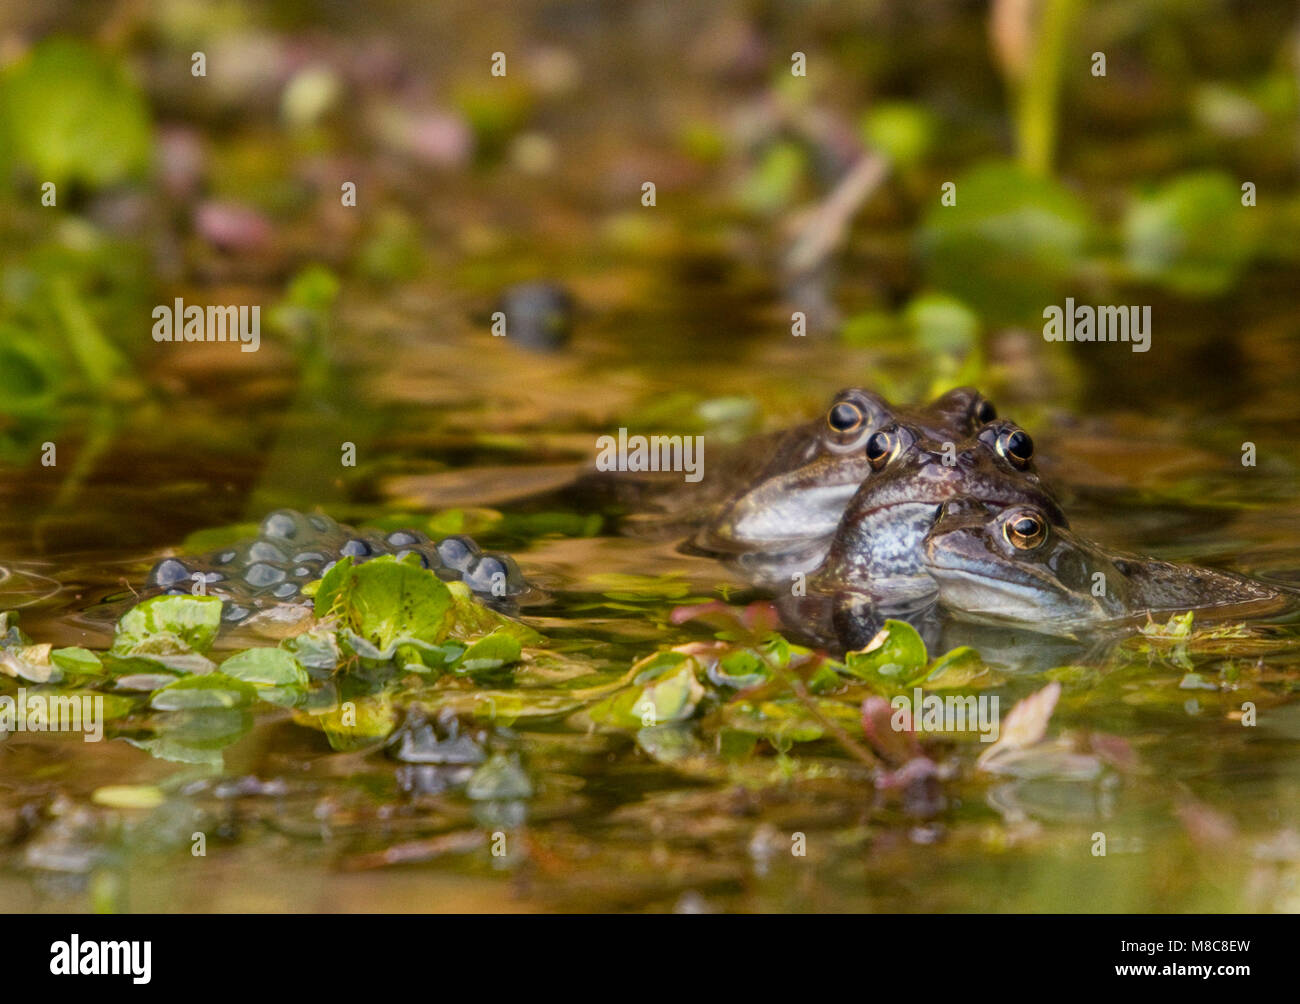 Frogs and nature in spring Stock Photo